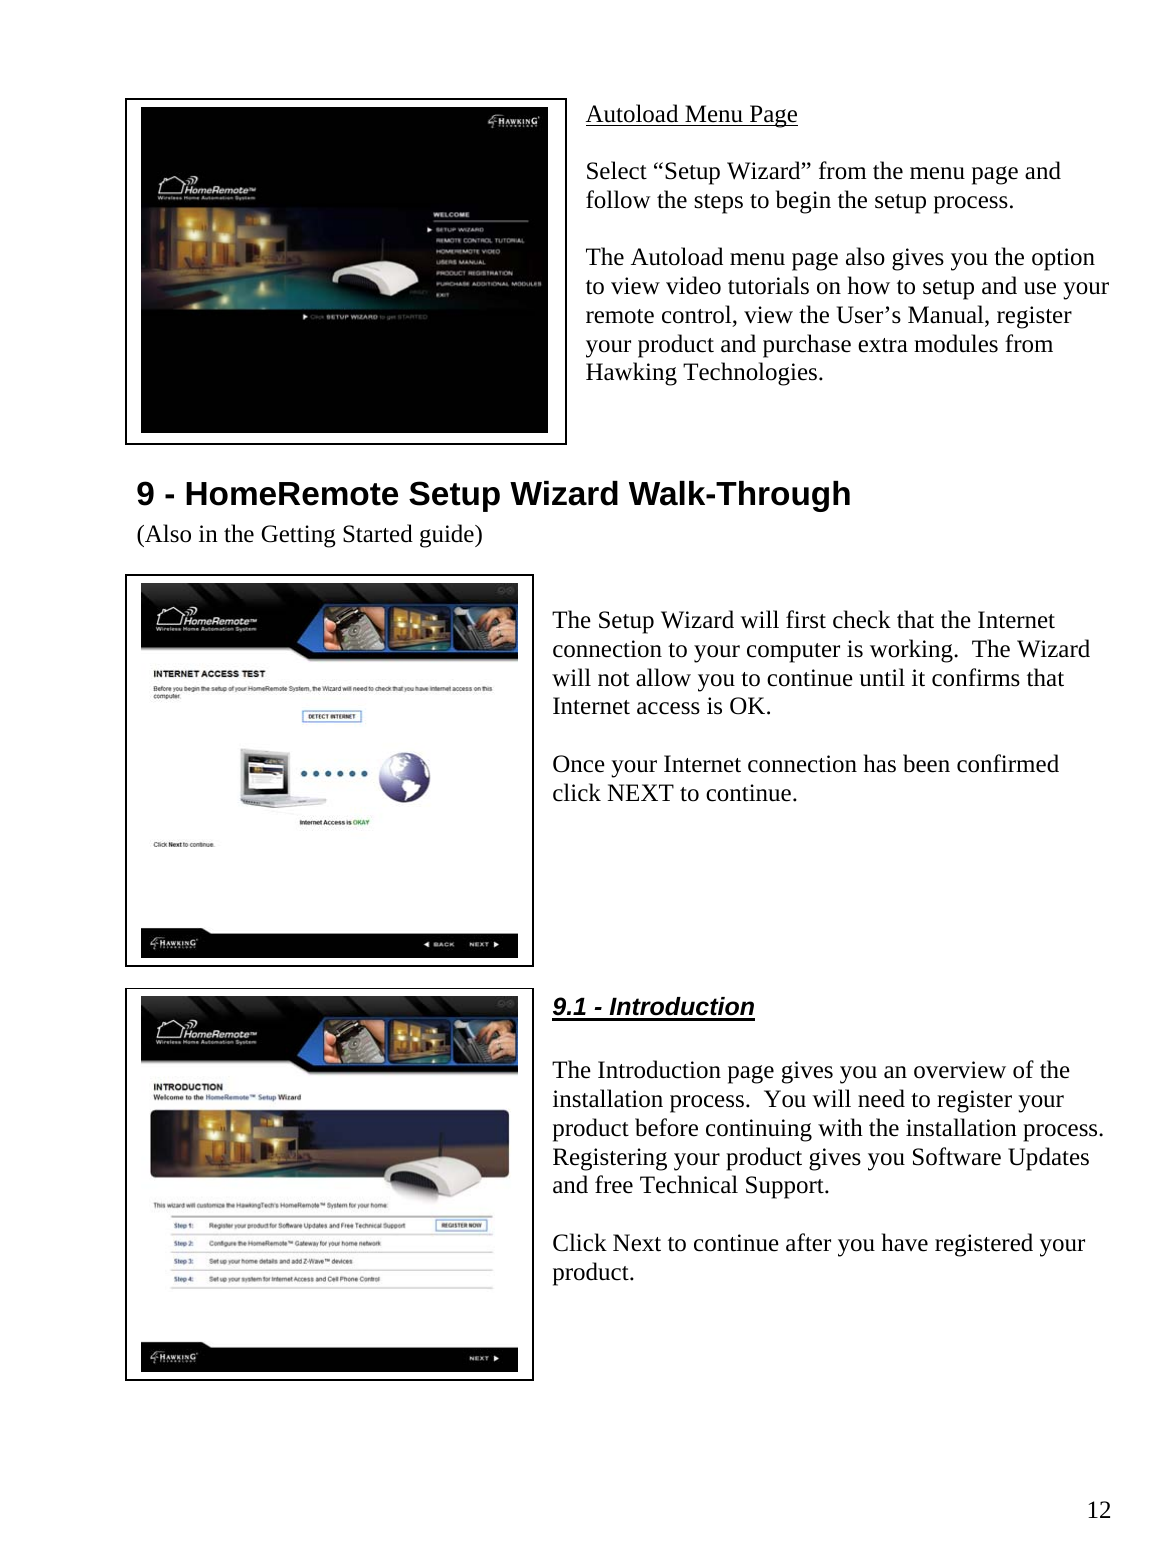  12Autoload Menu Page  Select “Setup Wizard” from the menu page and follow the steps to begin the setup process.  The Autoload menu page also gives you the option to view video tutorials on how to setup and use your remote control, view the User’s Manual, register your product and purchase extra modules from Hawking Technologies.  9 - HomeRemote Setup Wizard Walk-Through      (Also in the Getting Started guide)    The Setup Wizard will first check that the Internet connection to your computer is working.  The Wizard will not allow you to continue until it confirms that Internet access is OK.    Once your Internet connection has been confirmed click NEXT to continue.      9.1 - Introduction  The Introduction page gives you an overview of the installation process.  You will need to register your product before continuing with the installation process.  Registering your product gives you Software Updates and free Technical Support.  Click Next to continue after you have registered your product.    